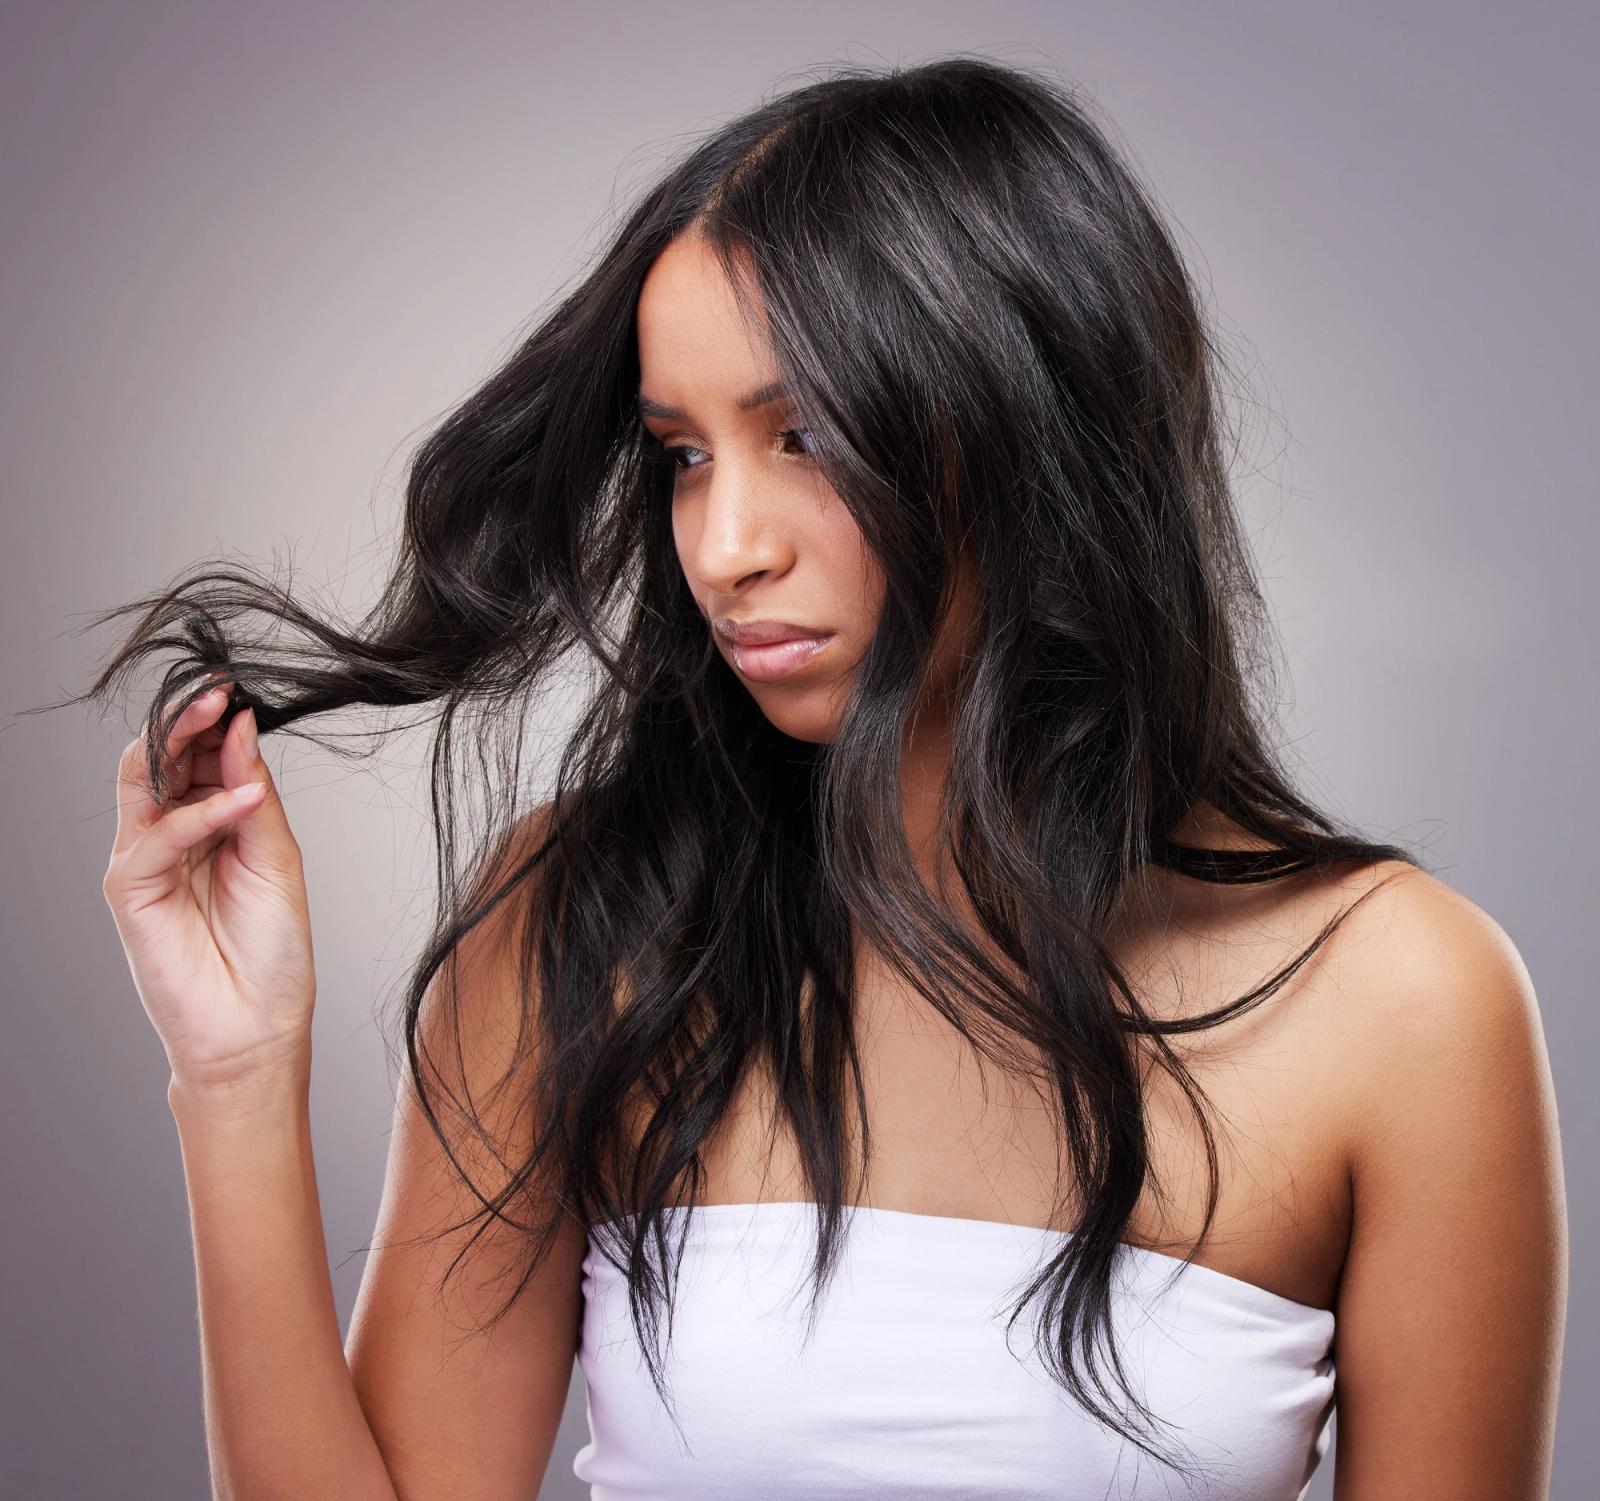 Woman with dark hair holding up the ends of her hair, looking at hair with disgust.